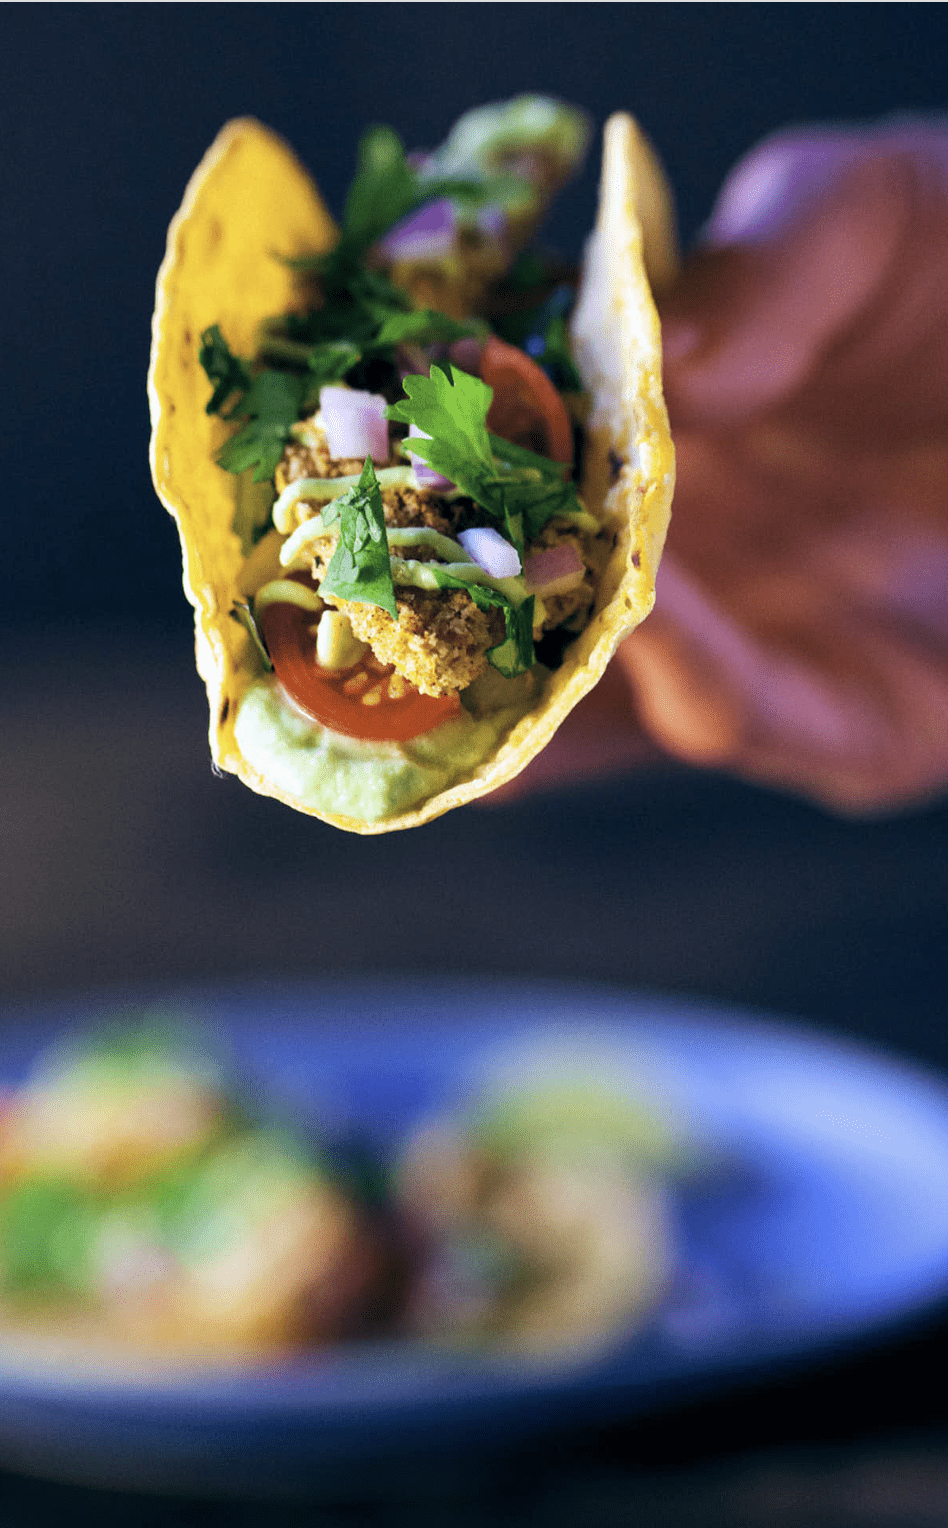 A straight view of a hand holding the crispy squash tacos with jalapeno lime crema.